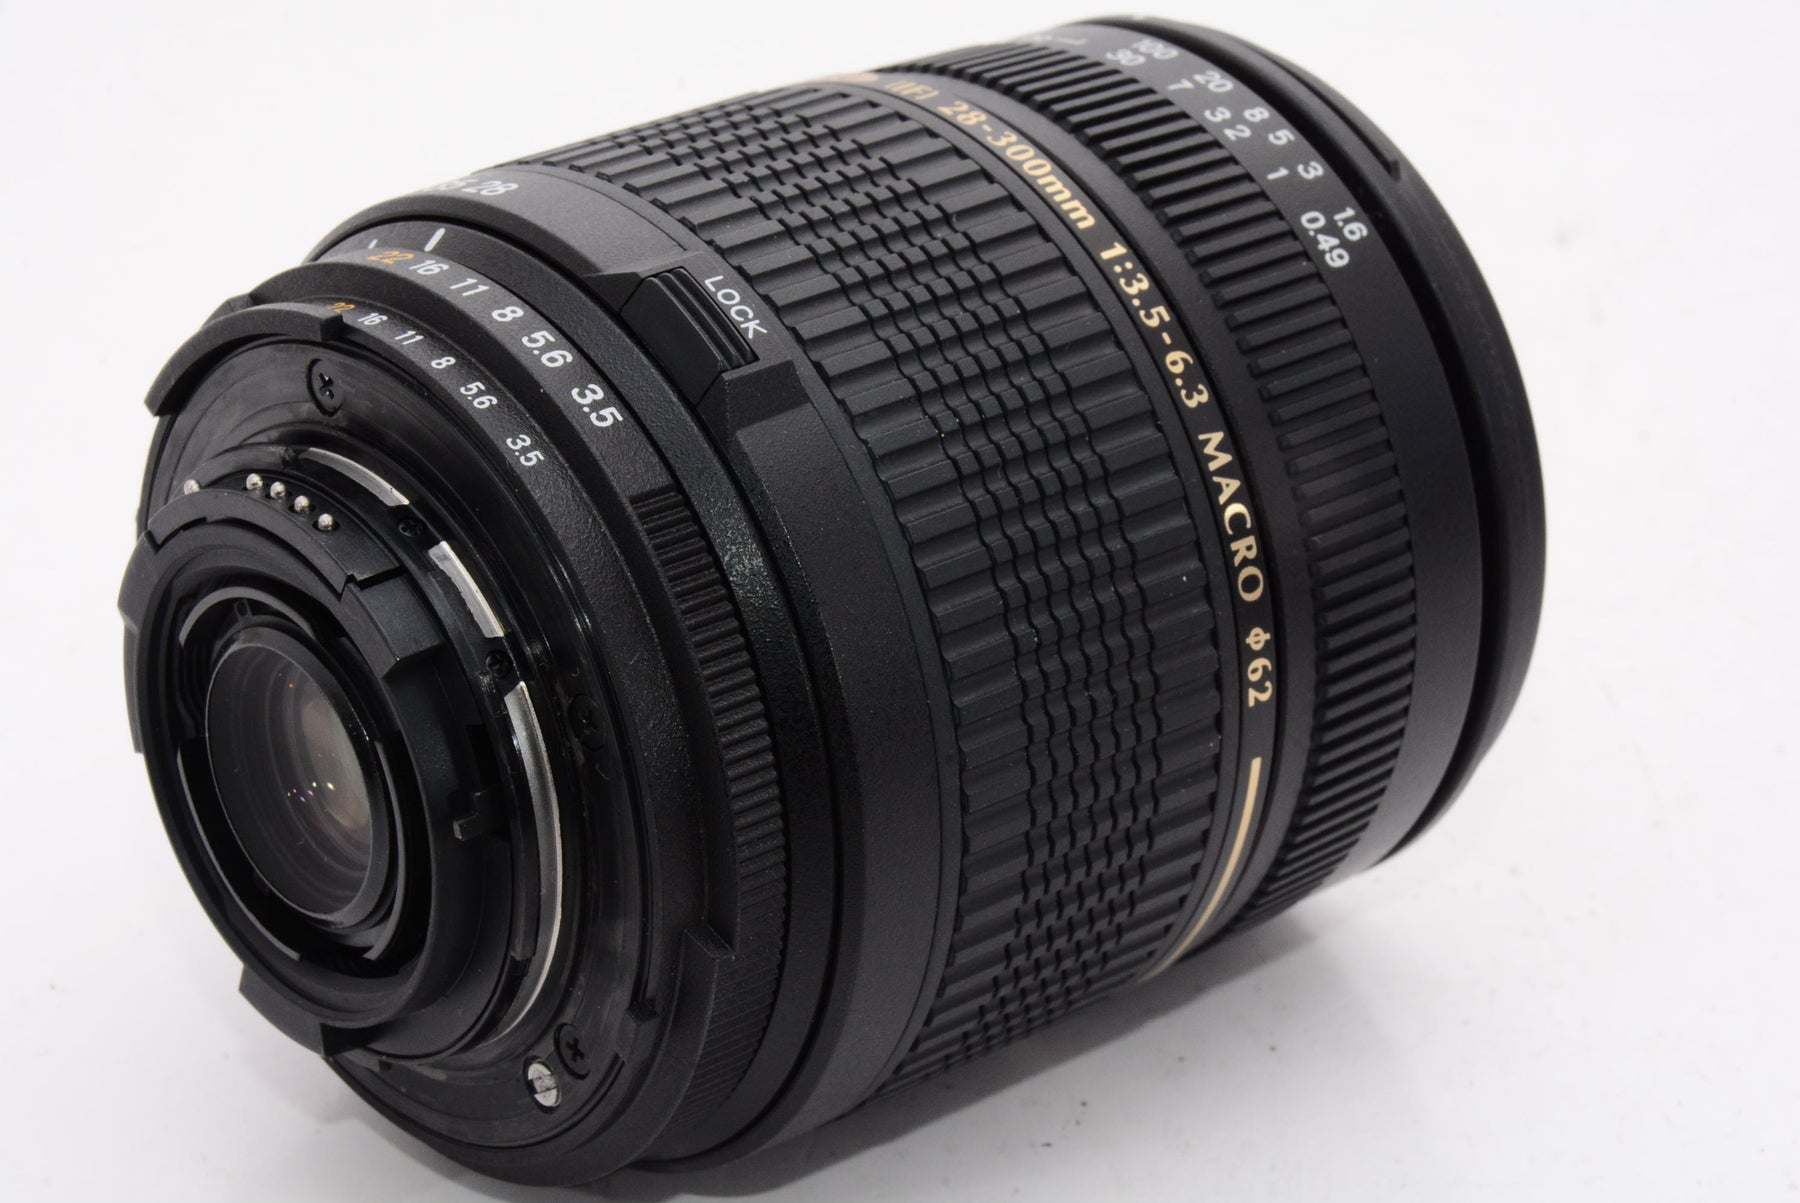 TAMRON AF28-300mm f3.5-6.3 XR Di ニコン用 A061N - 交換レンズ